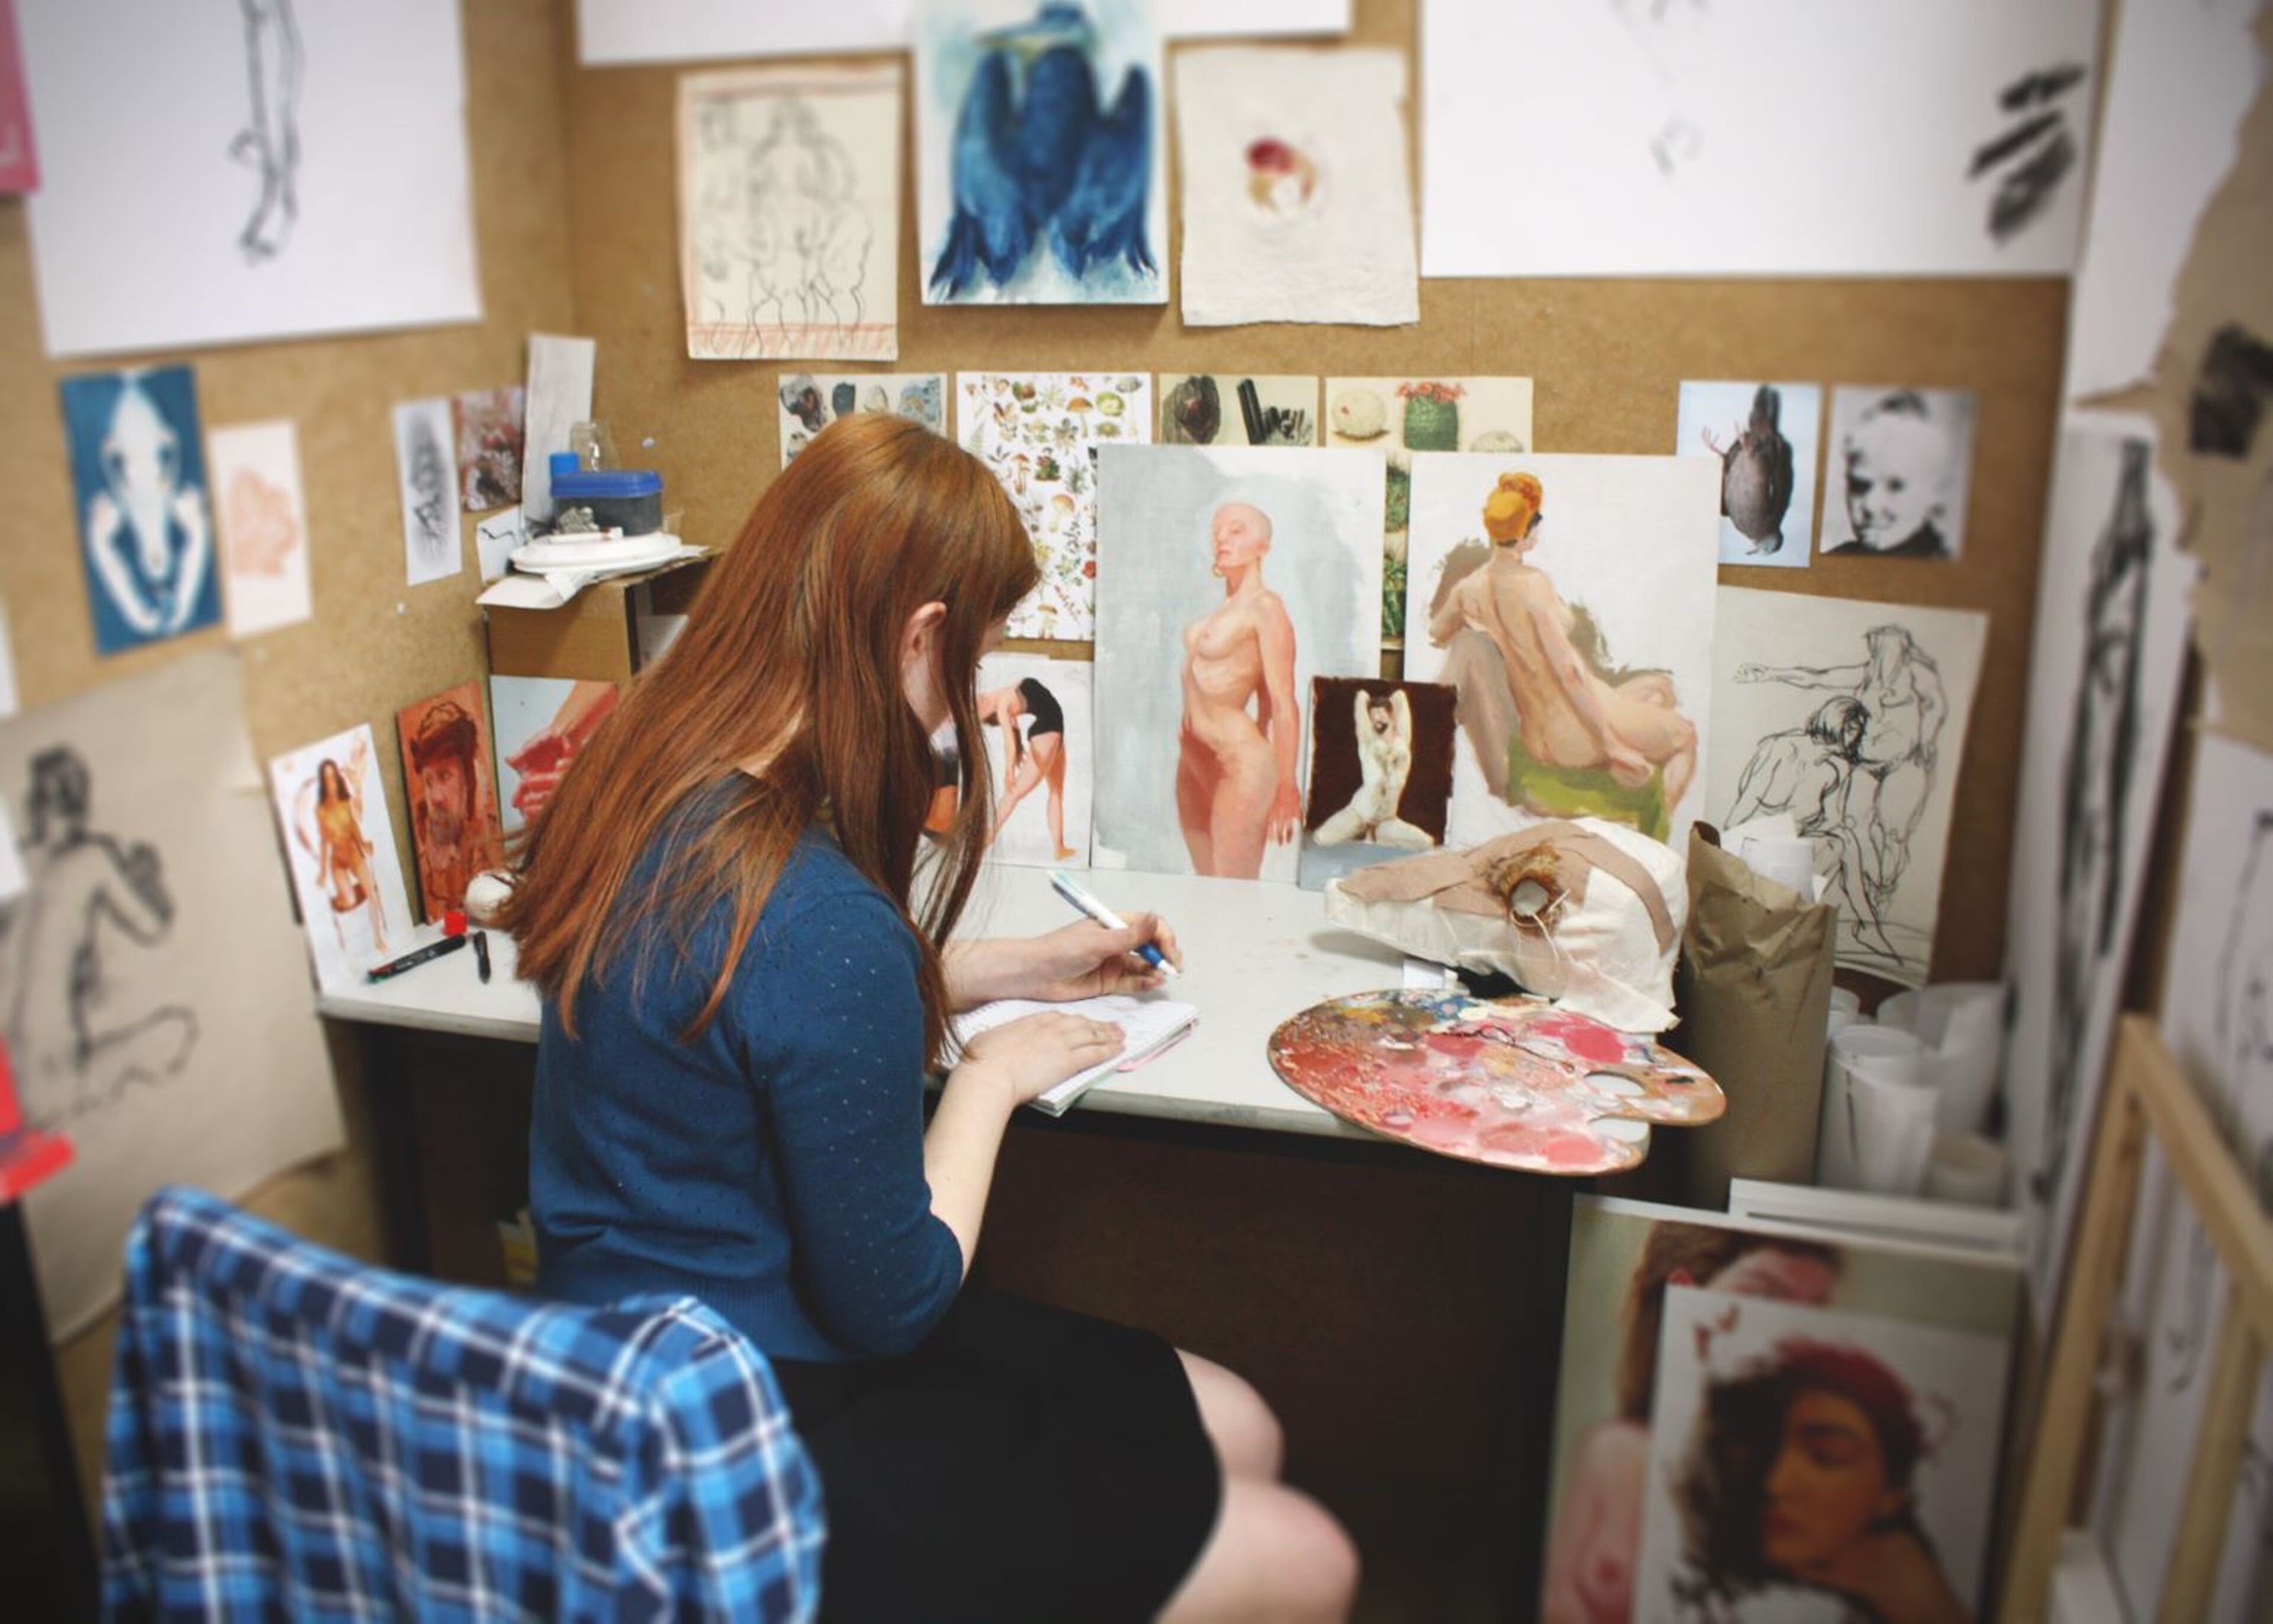 An artist meticulously works on her craft in a studio surrounded by various figurative sketches and paintings.